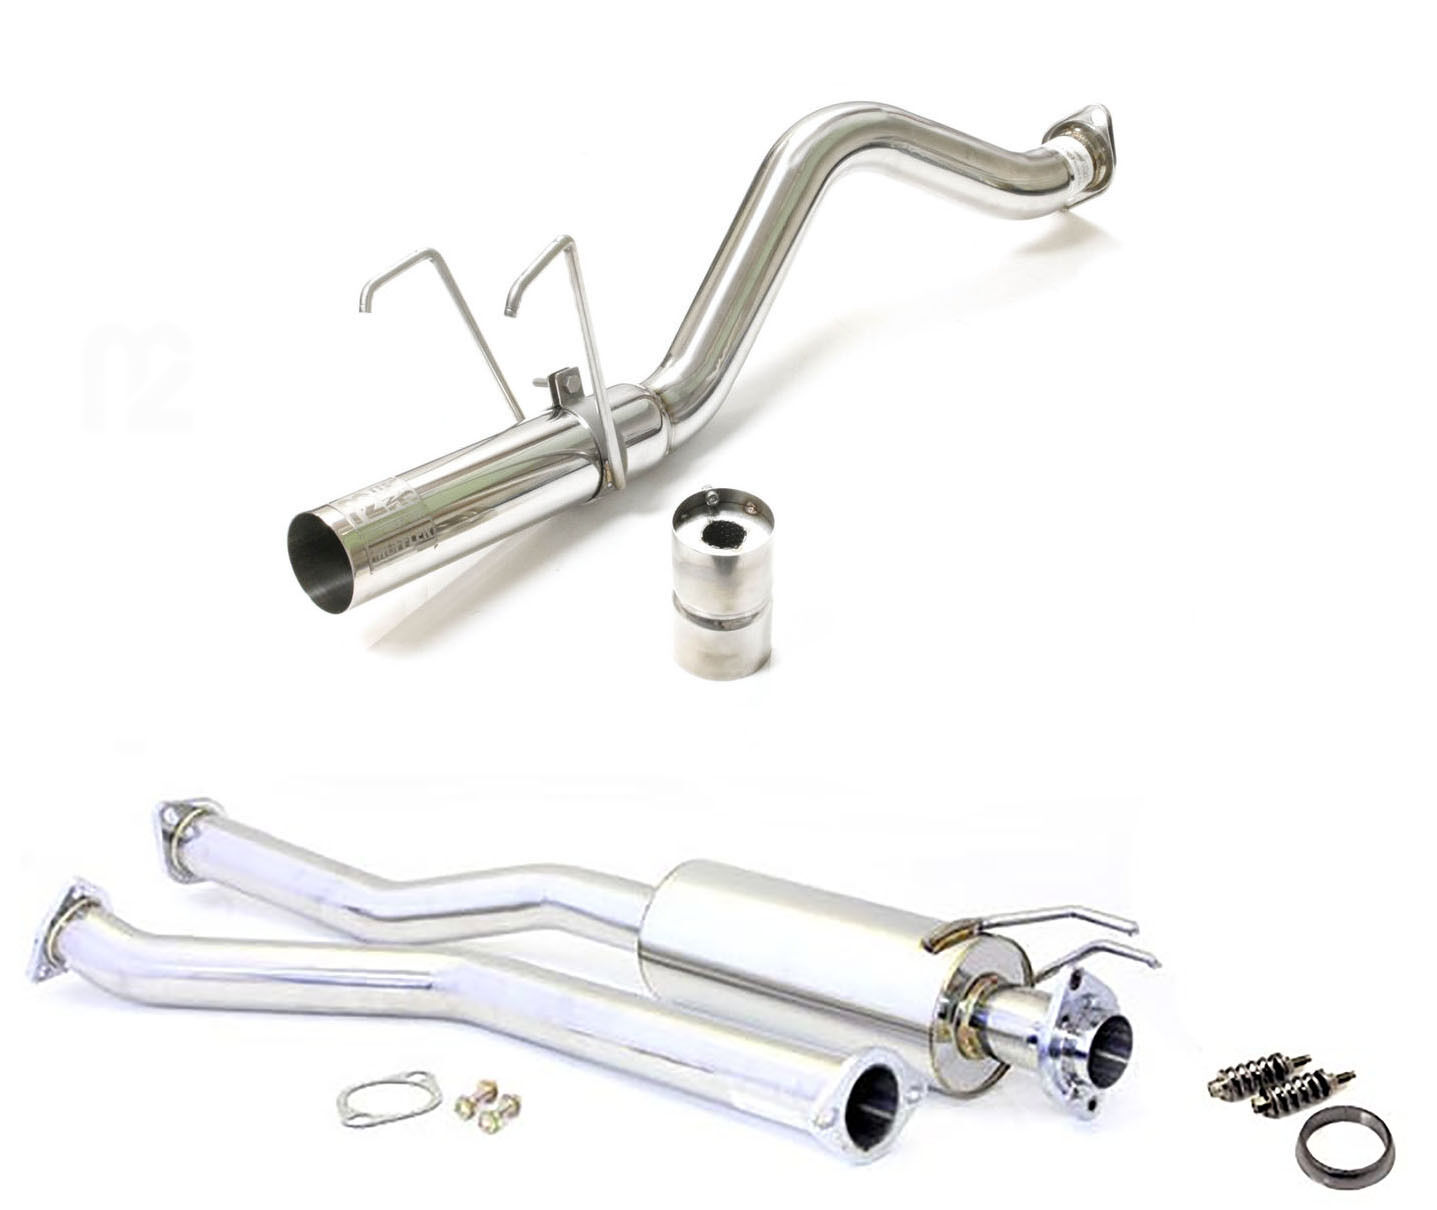 M2 HONDA CIVIC TYPE R EP3 HORNET CAT BACK STAINLESS STEEL EXHAUST SYSTEM Y3184